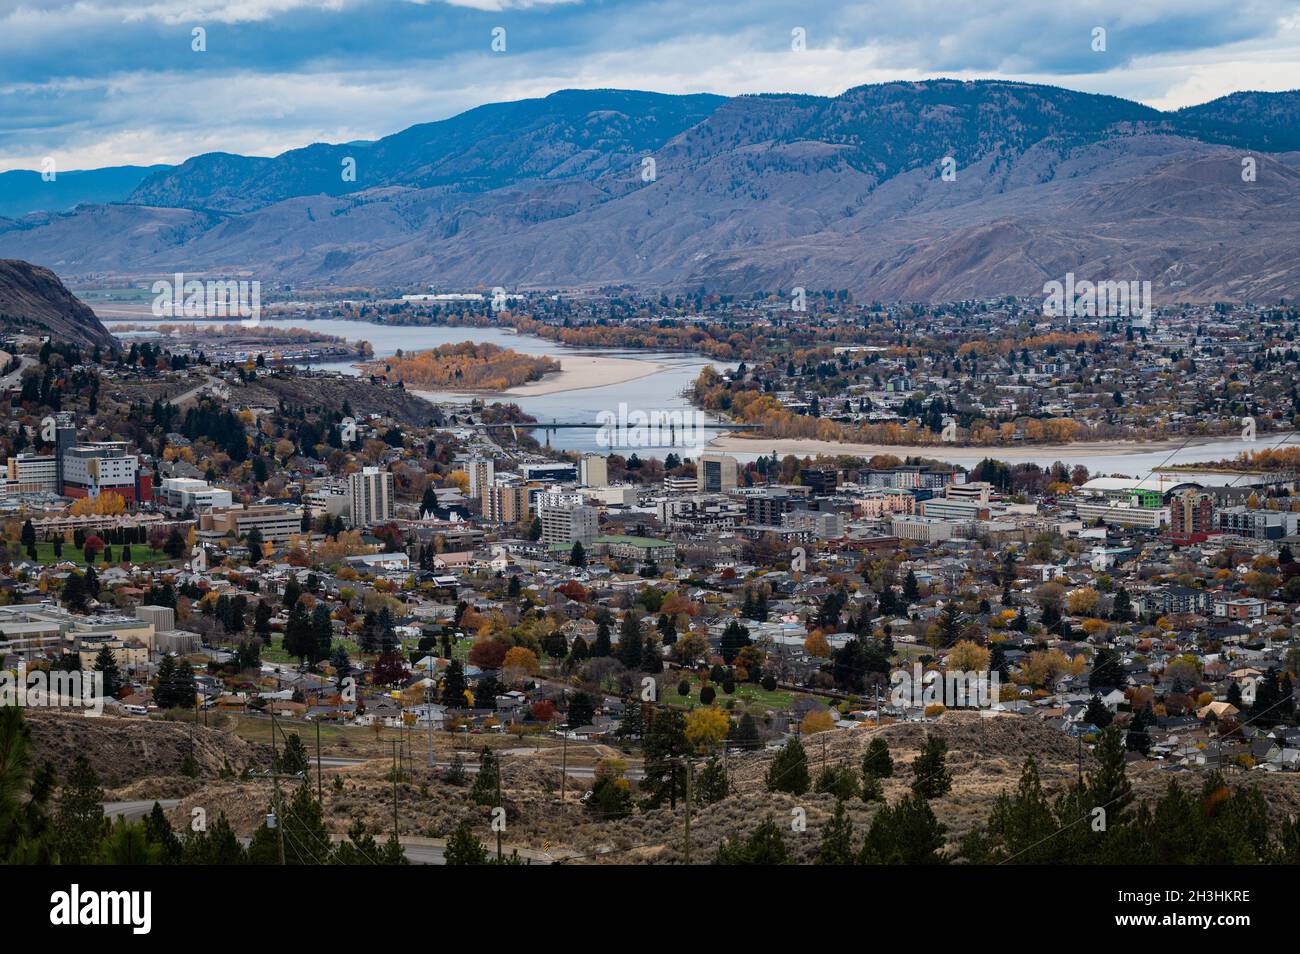 View looking west from the Rose Hill area of the South Thompson River, hills, Mt Peter and Paul, bridges, and the city of Kamloops. Stock Photo